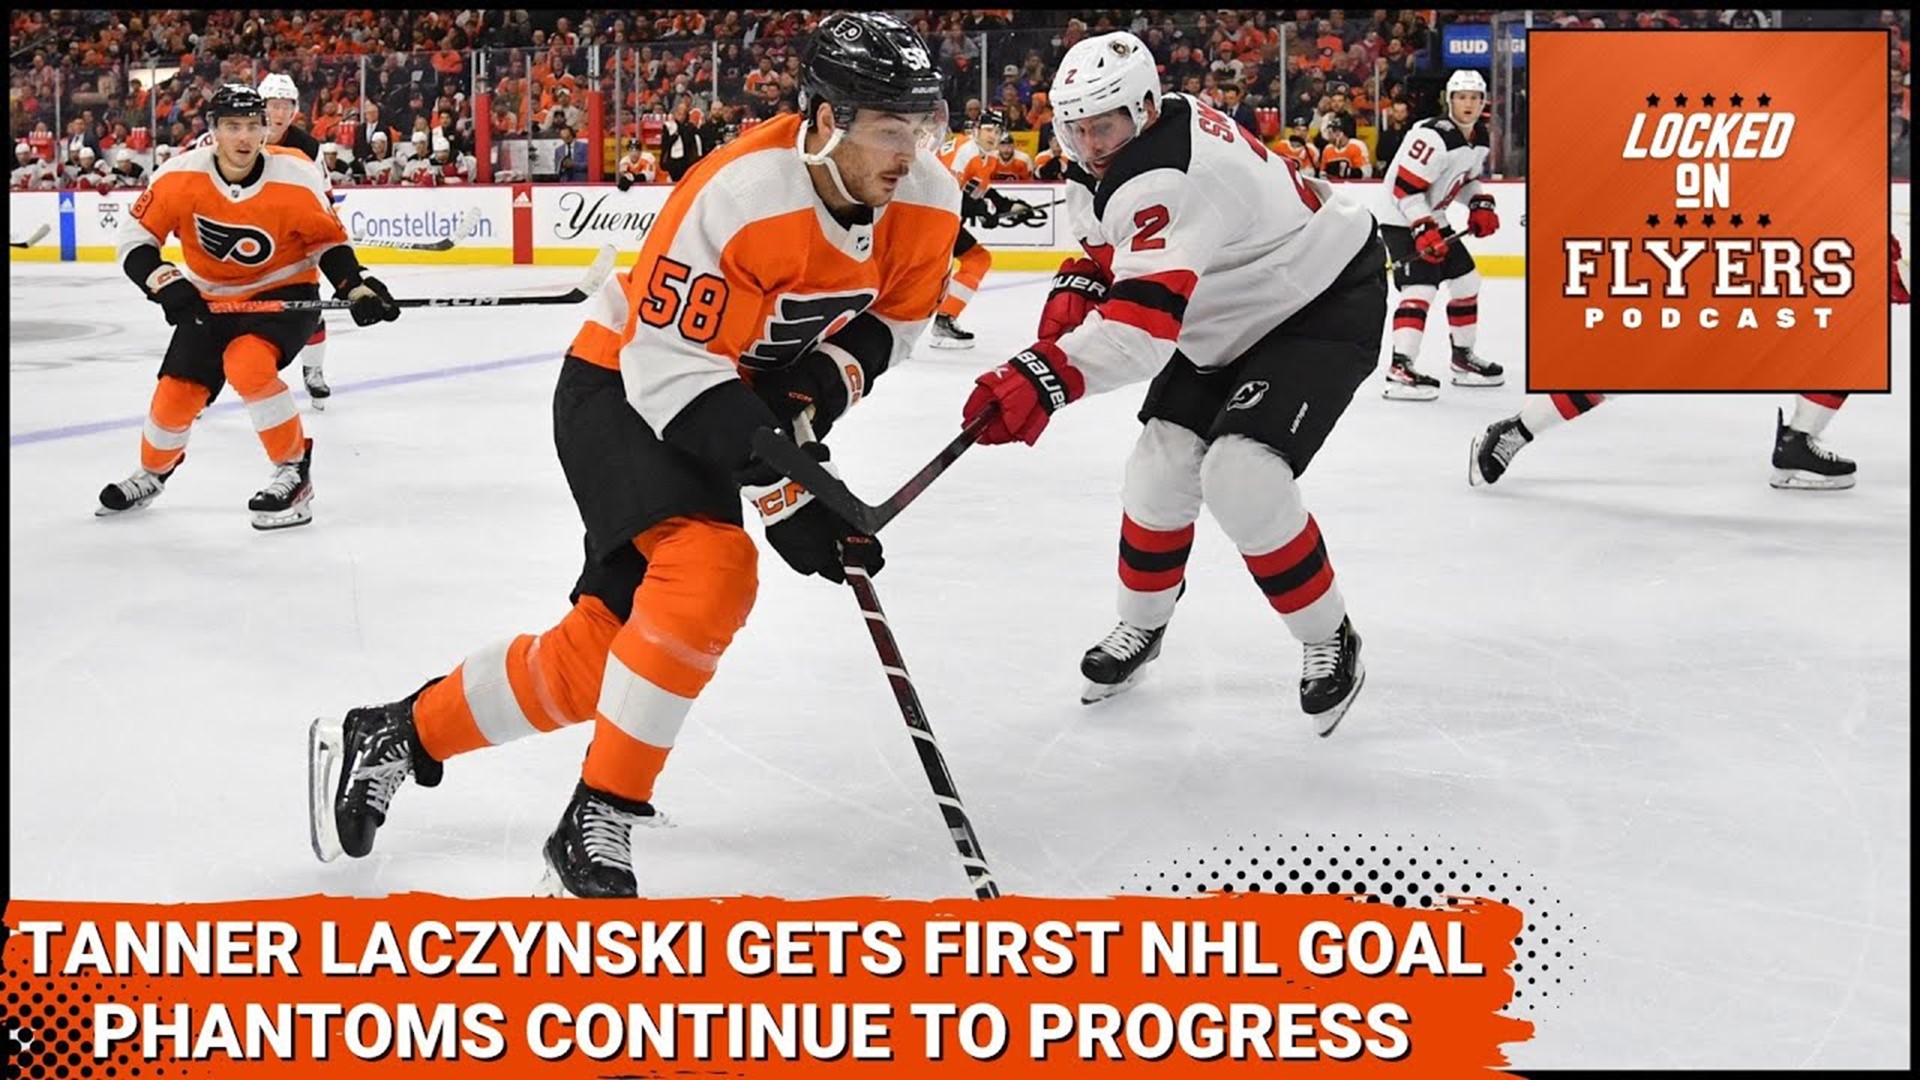 Russ & Rachel recap last night’s Flyers matchup vs the Calgary Flames. Tanner Laczynski got his first NHL, and Joel Farabee was back on the board.